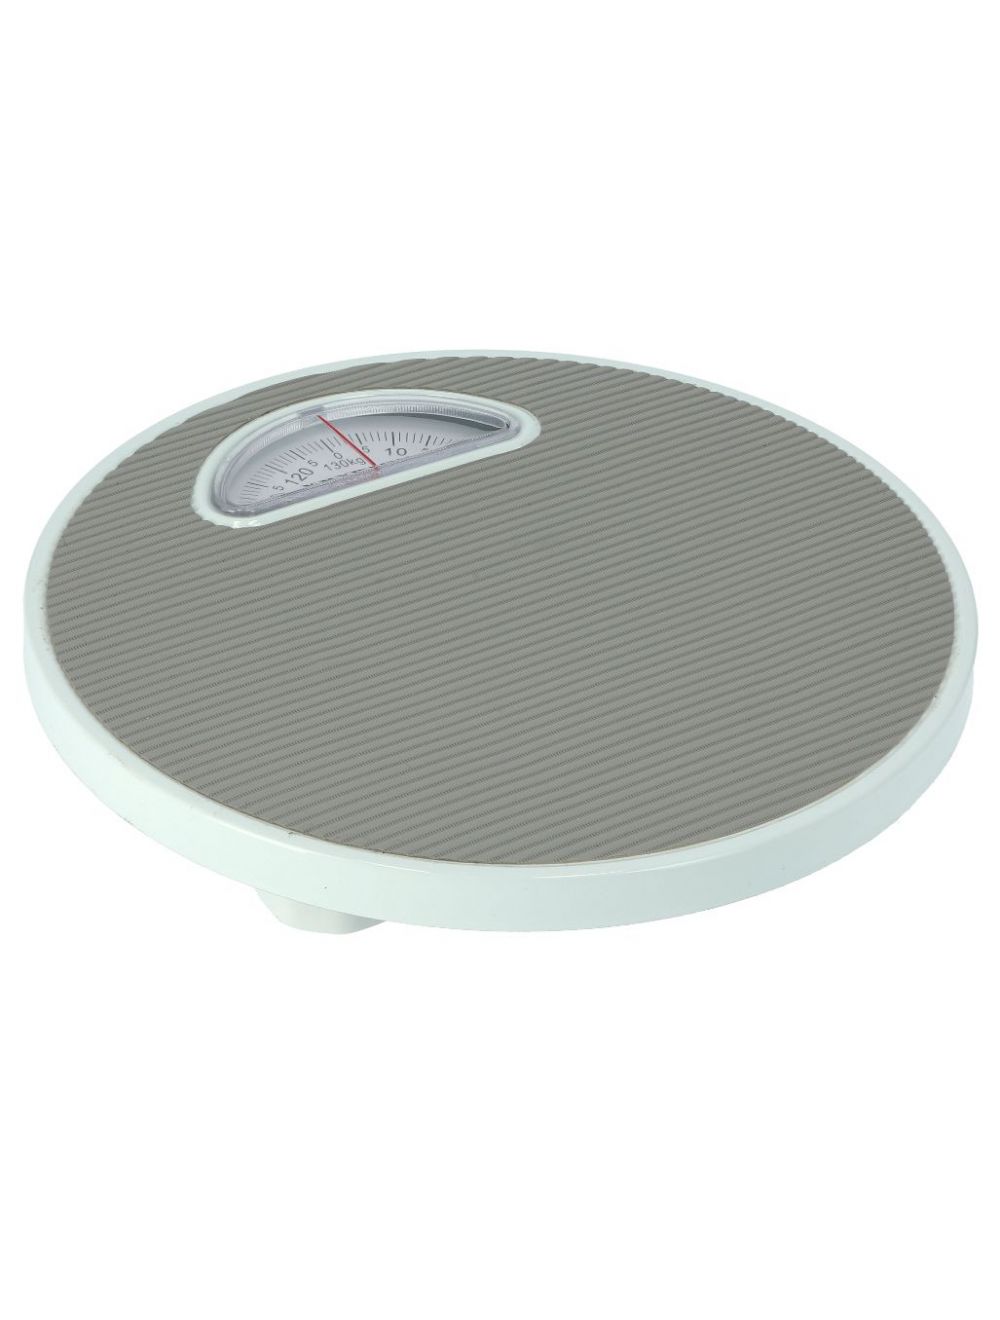 Mechanical Personal Body Weight Weighing Scale-KNBS5139